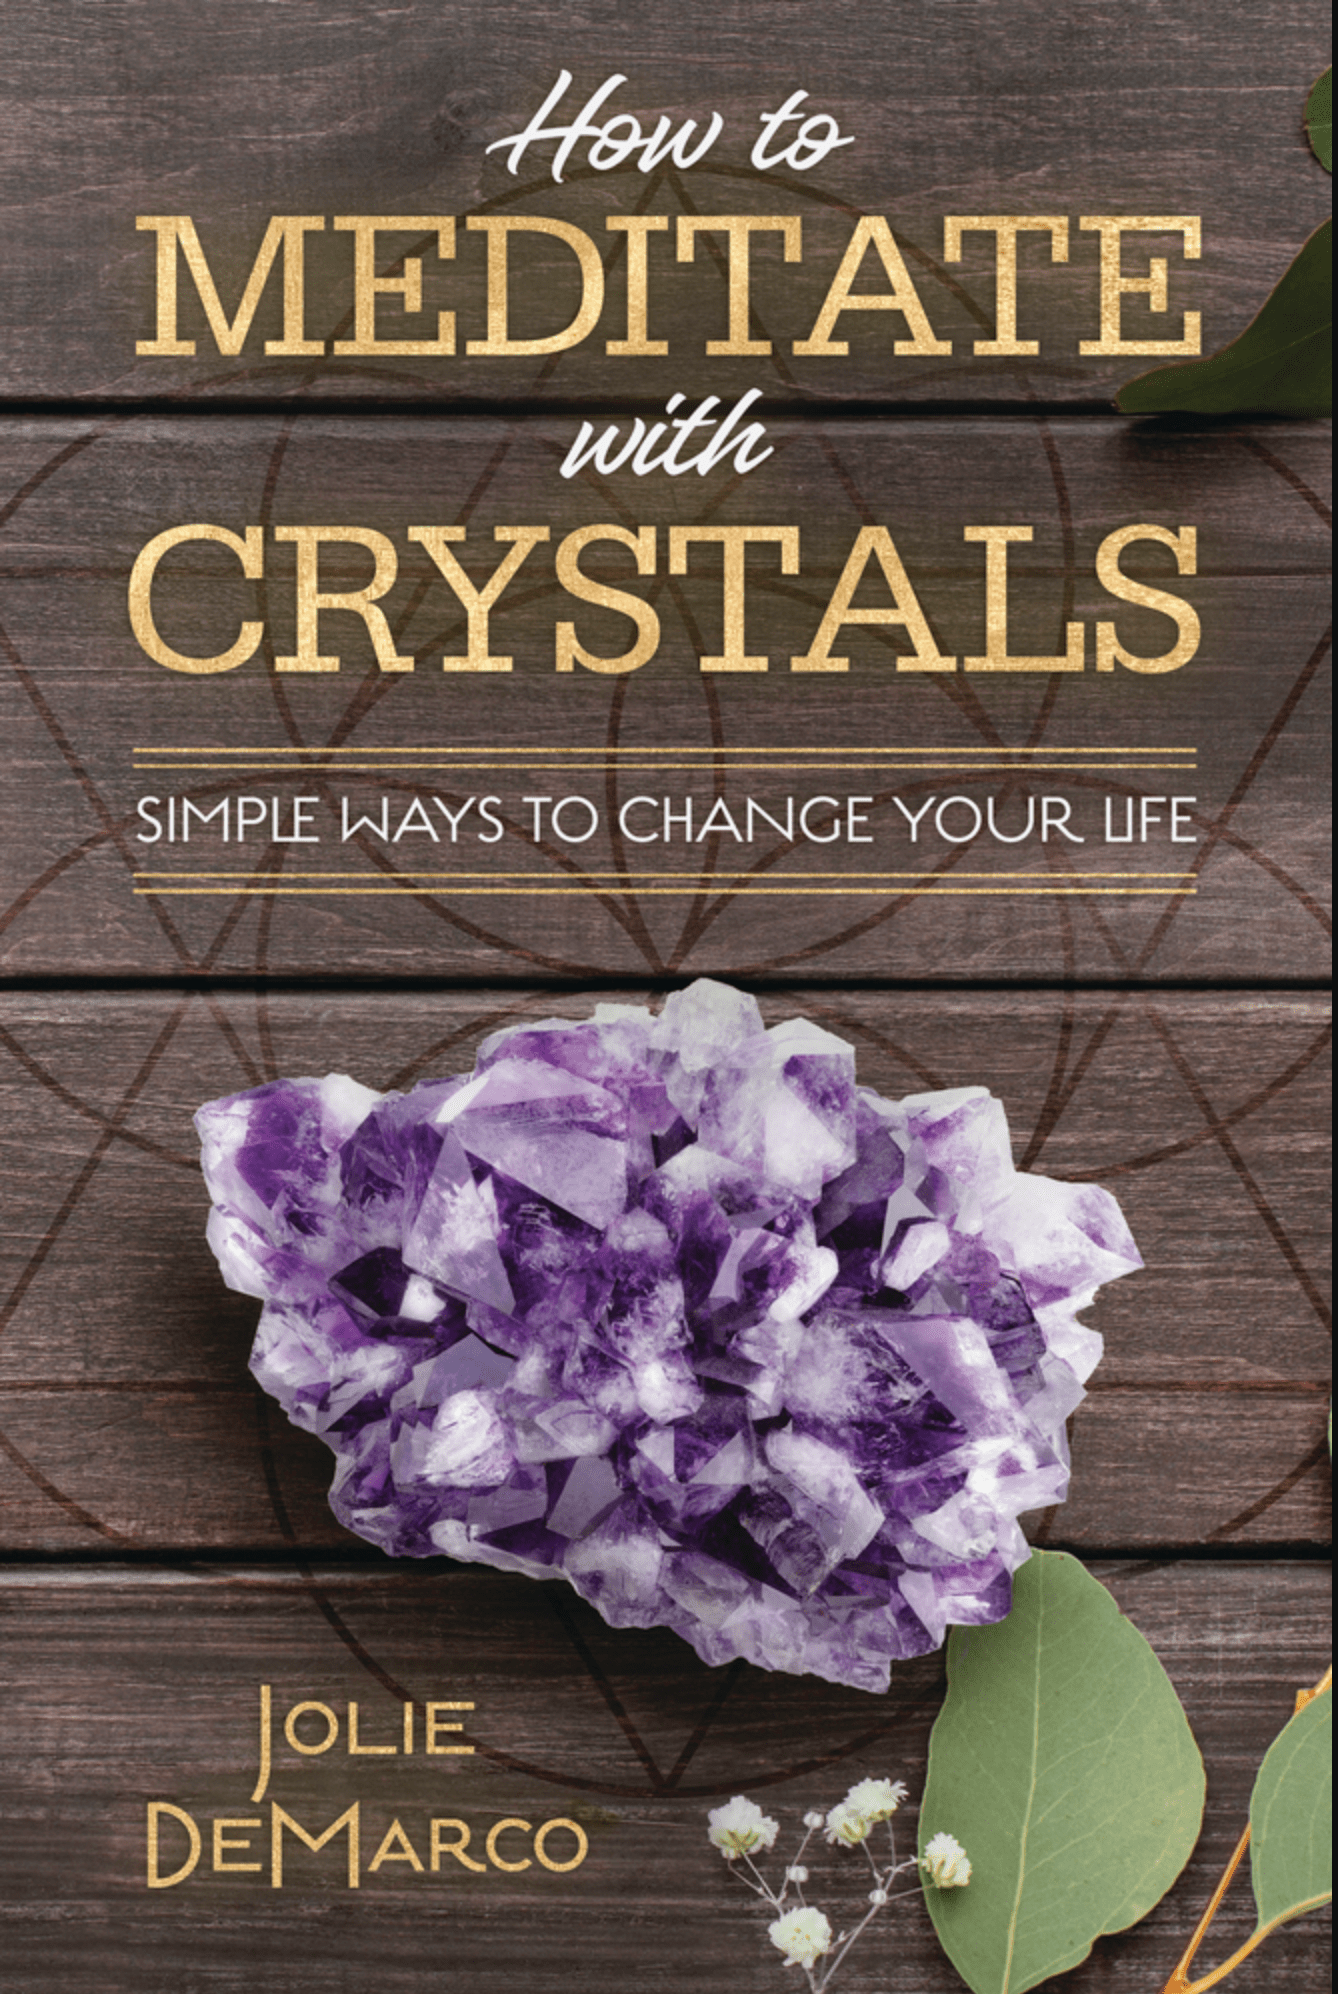 How to Meditate with Crystals | Simple Ways to Change Your Life - Spiral Circle